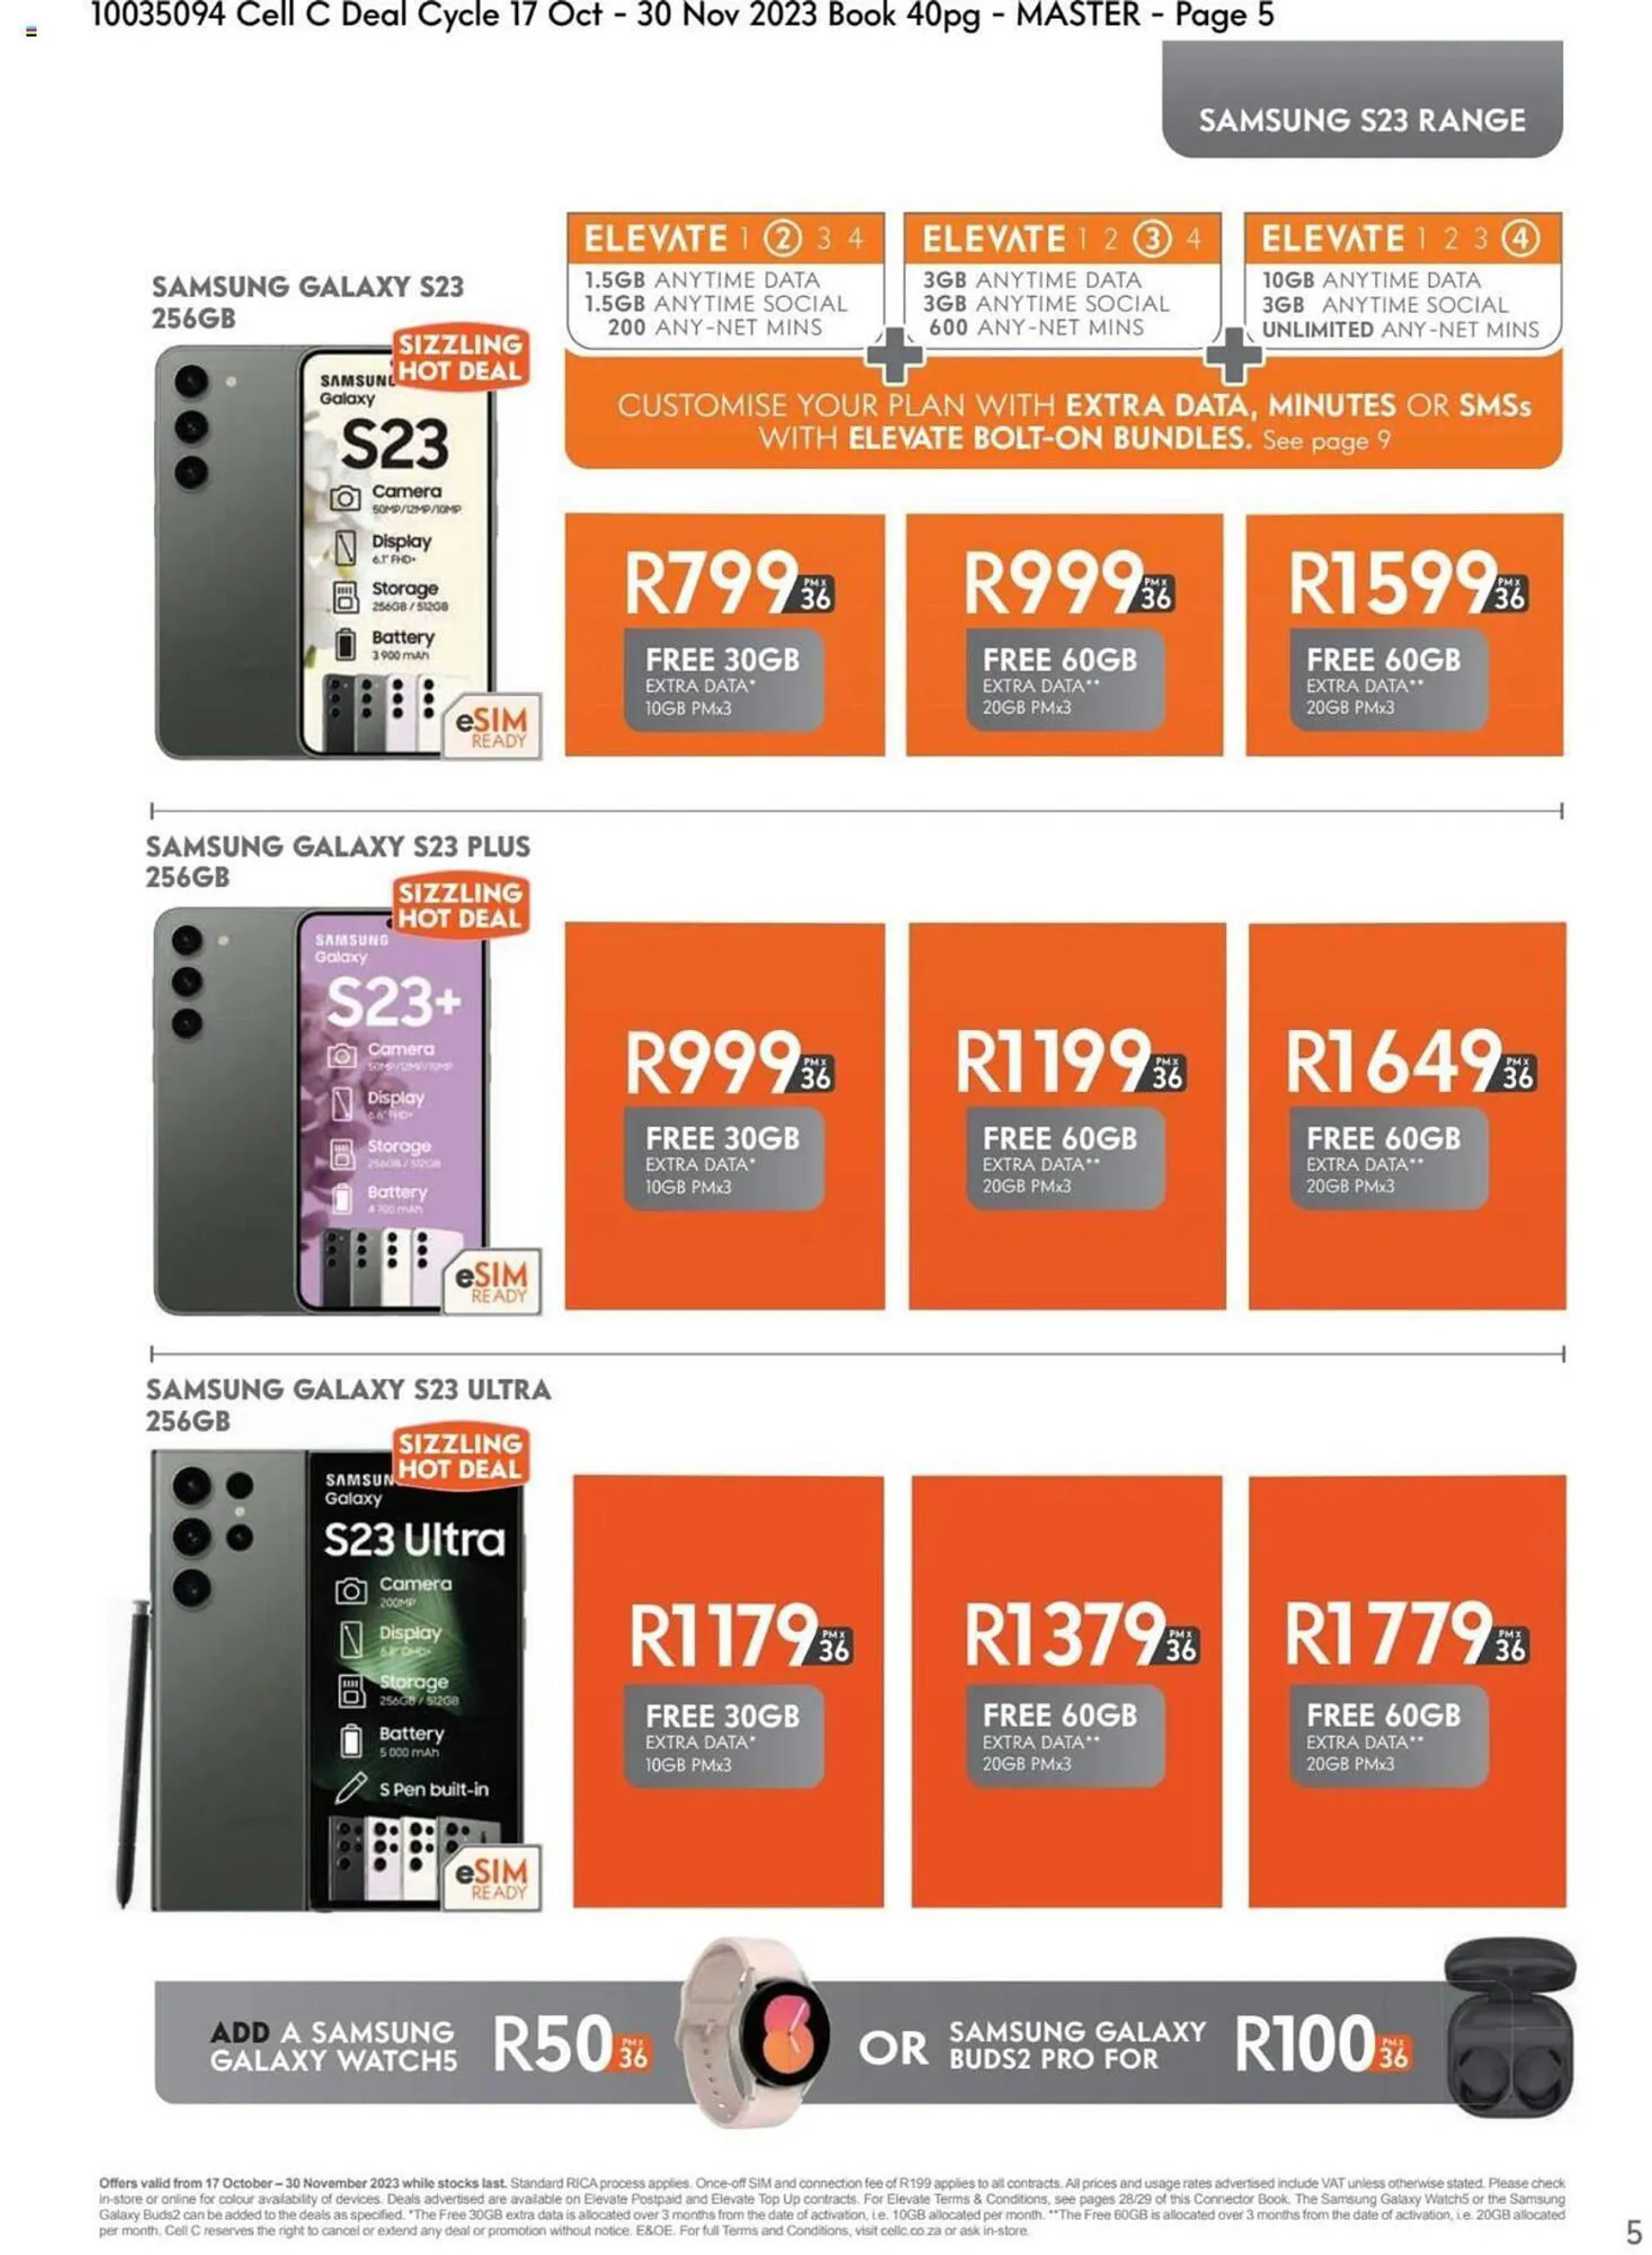 Cell C catalogue - 5